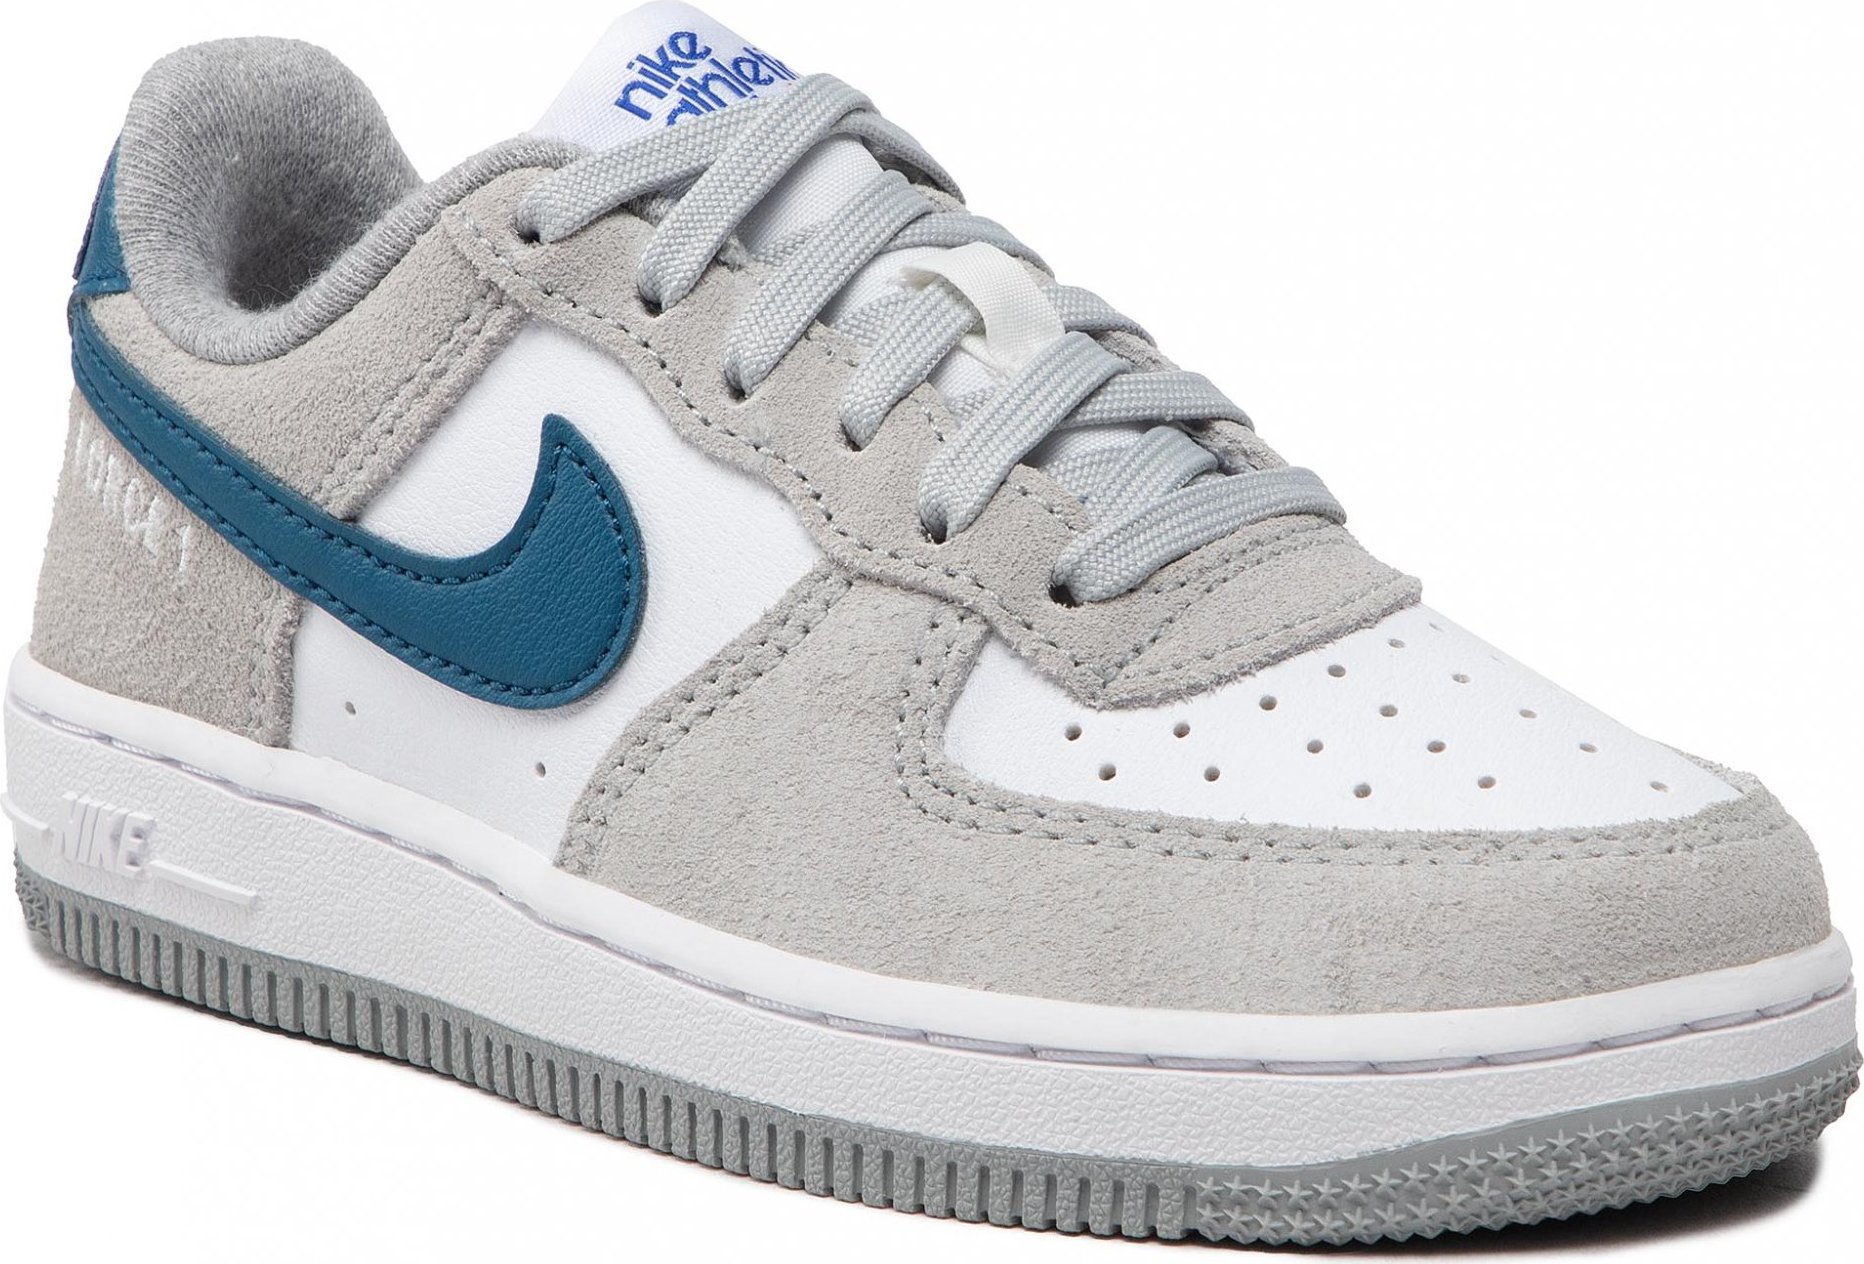 NIKE Force 1 Lv8 (PS) DH9788 001